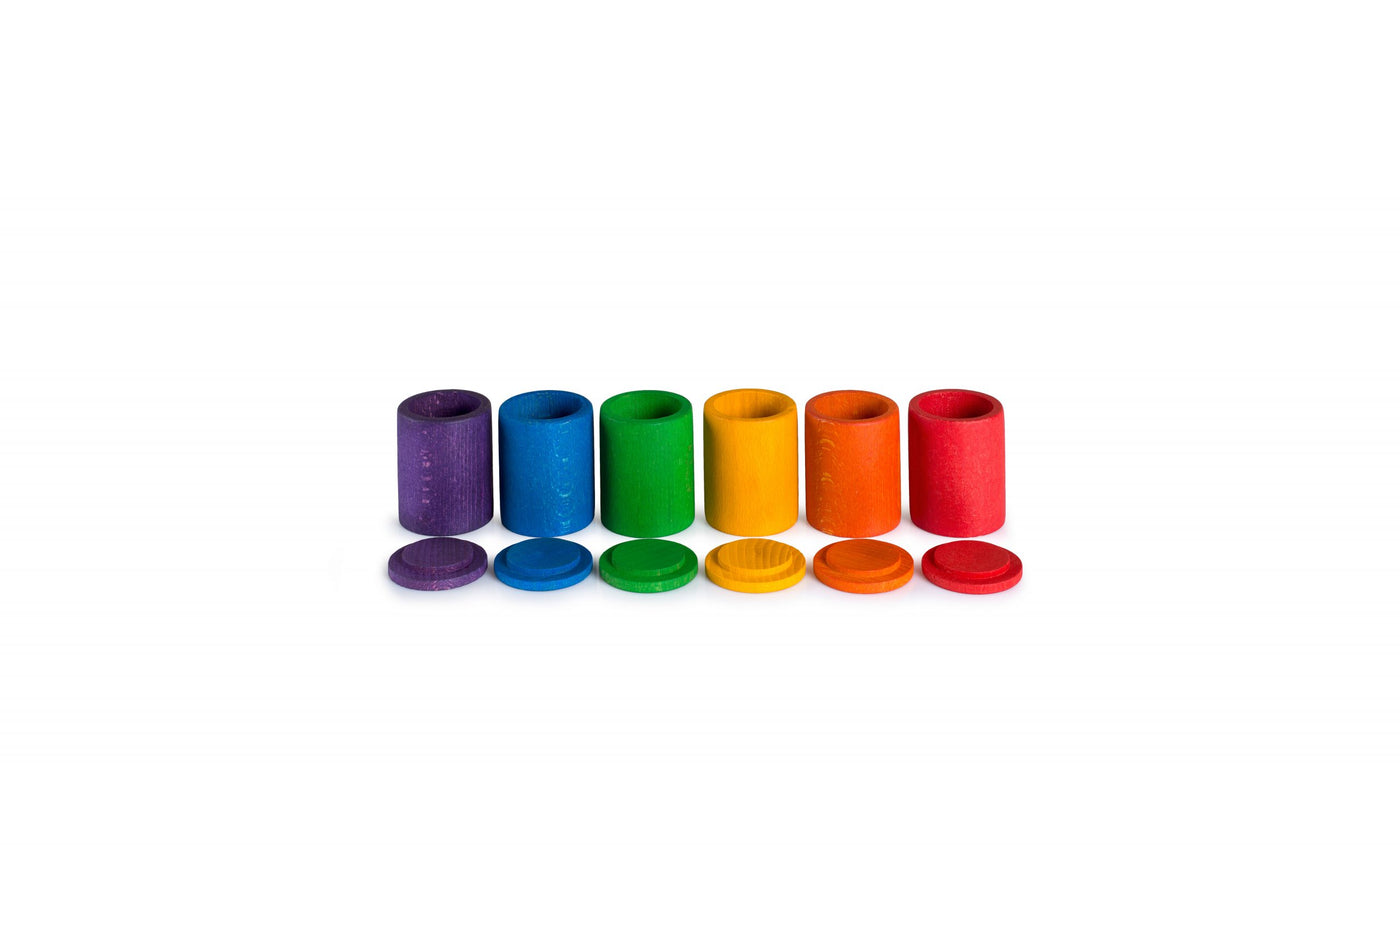 Grapat 6 Colored Cups with Covers